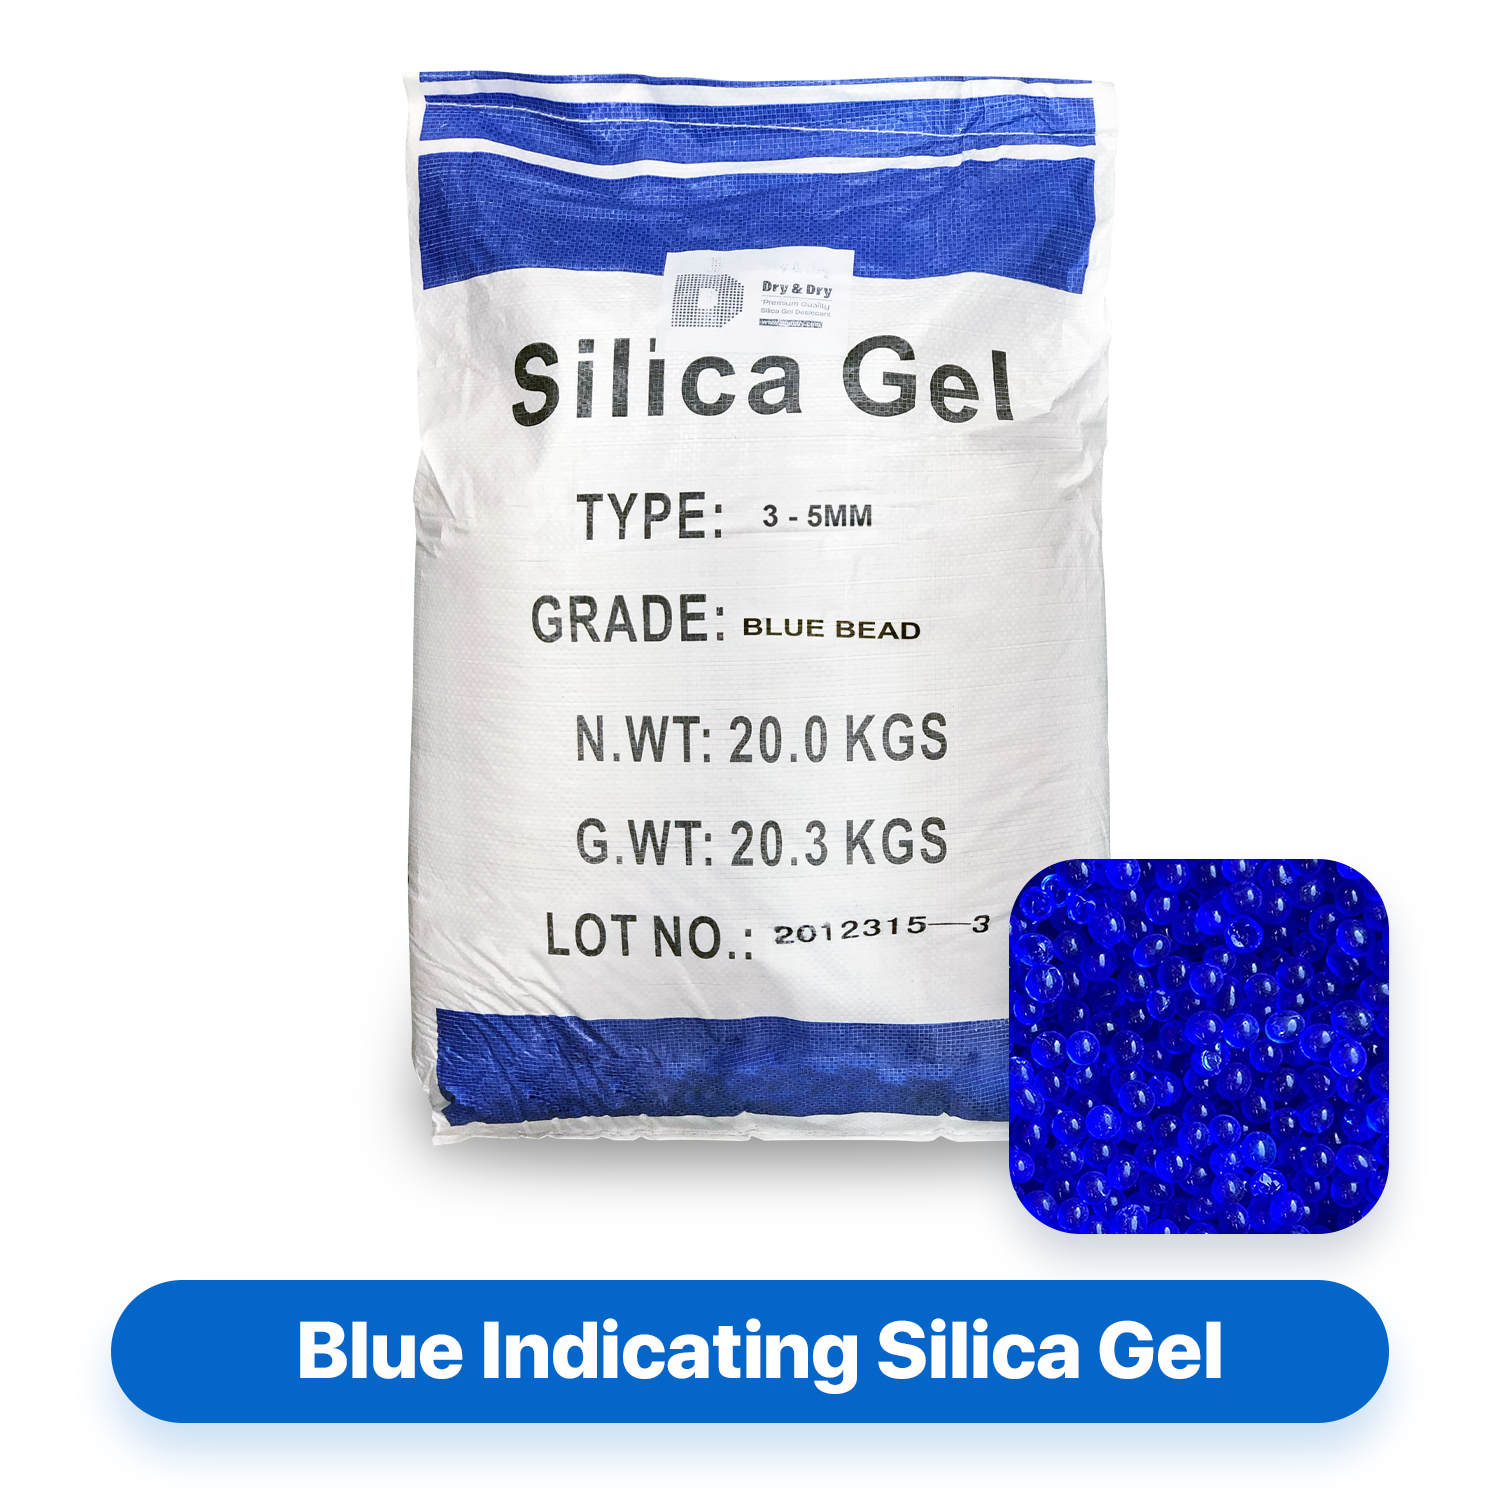 1/2 Gallon Dry & Dry Premium Blue Indicating Silica Gel Beads (Industry  Standard 2-4 mm) - 3.7 LBS Reusable